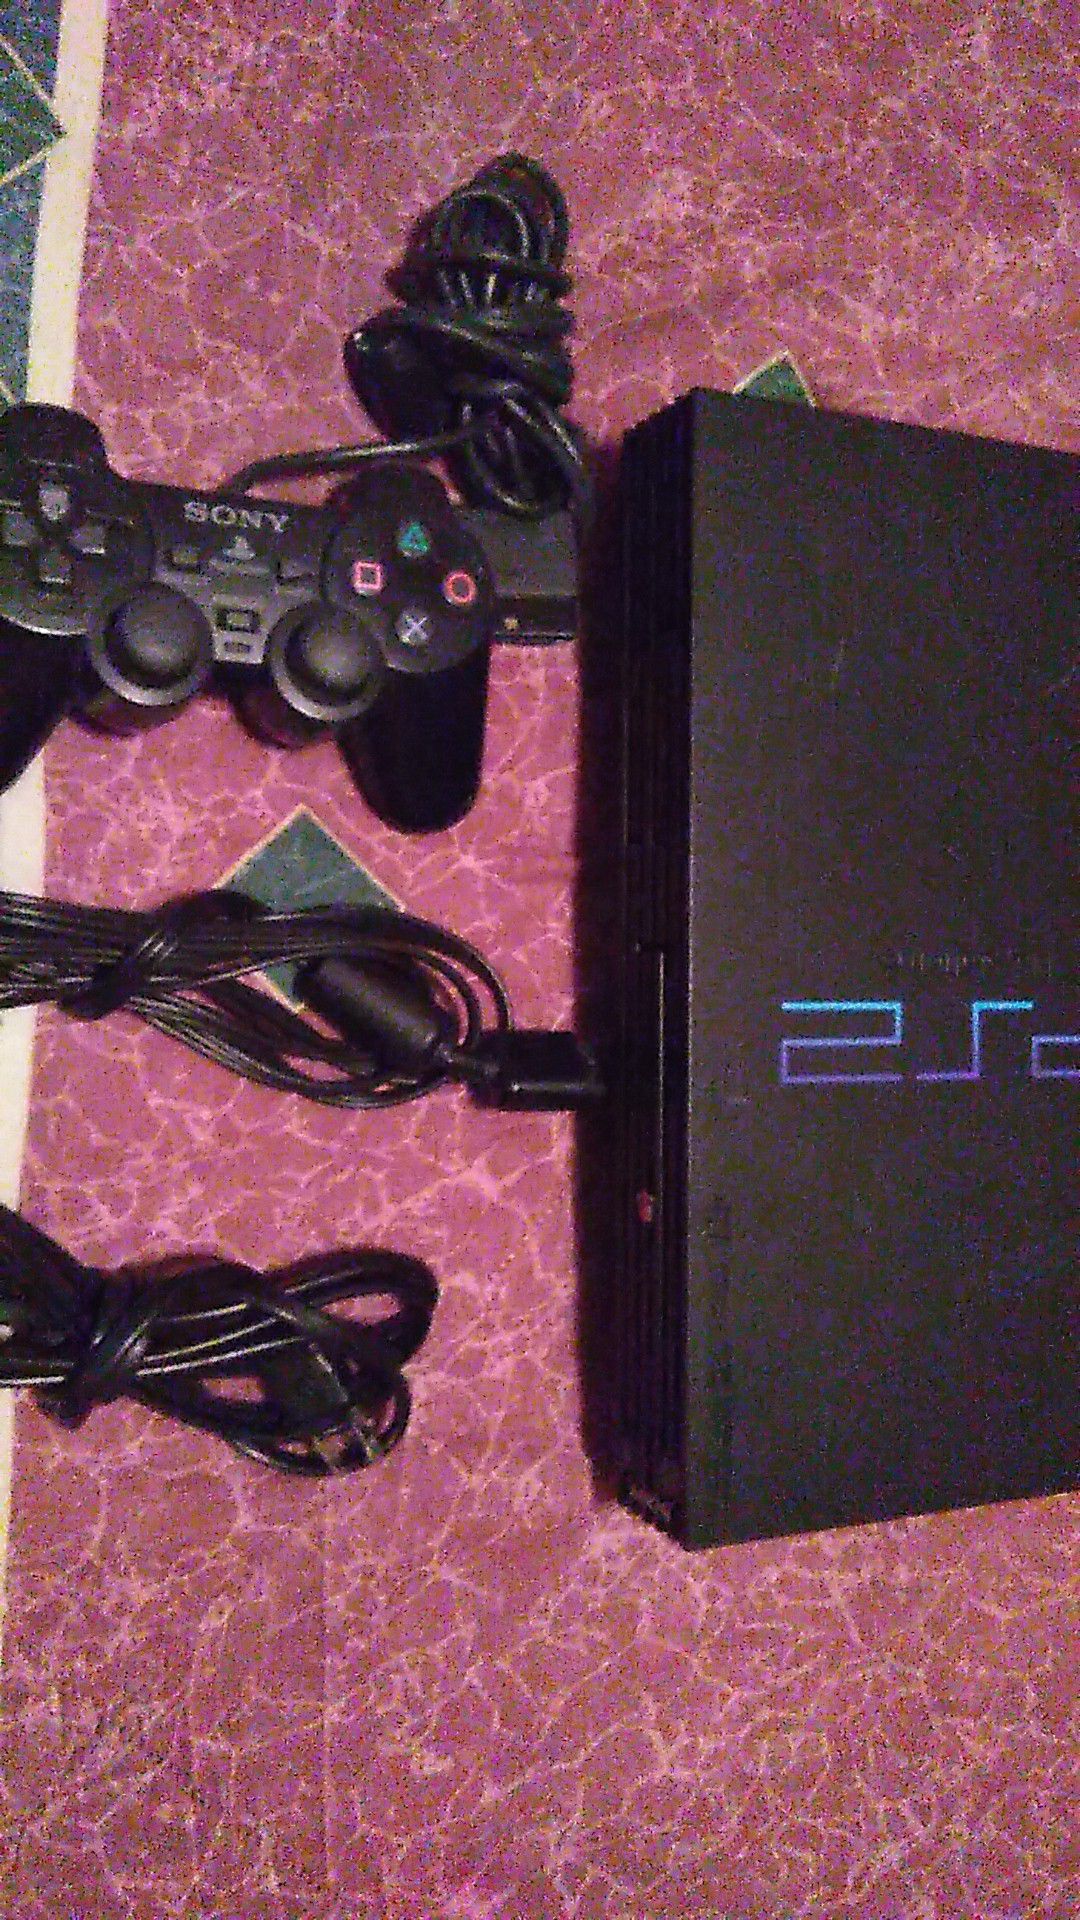 Play Station 2 with the hook ups for $50.00. I have 4 systems for sale